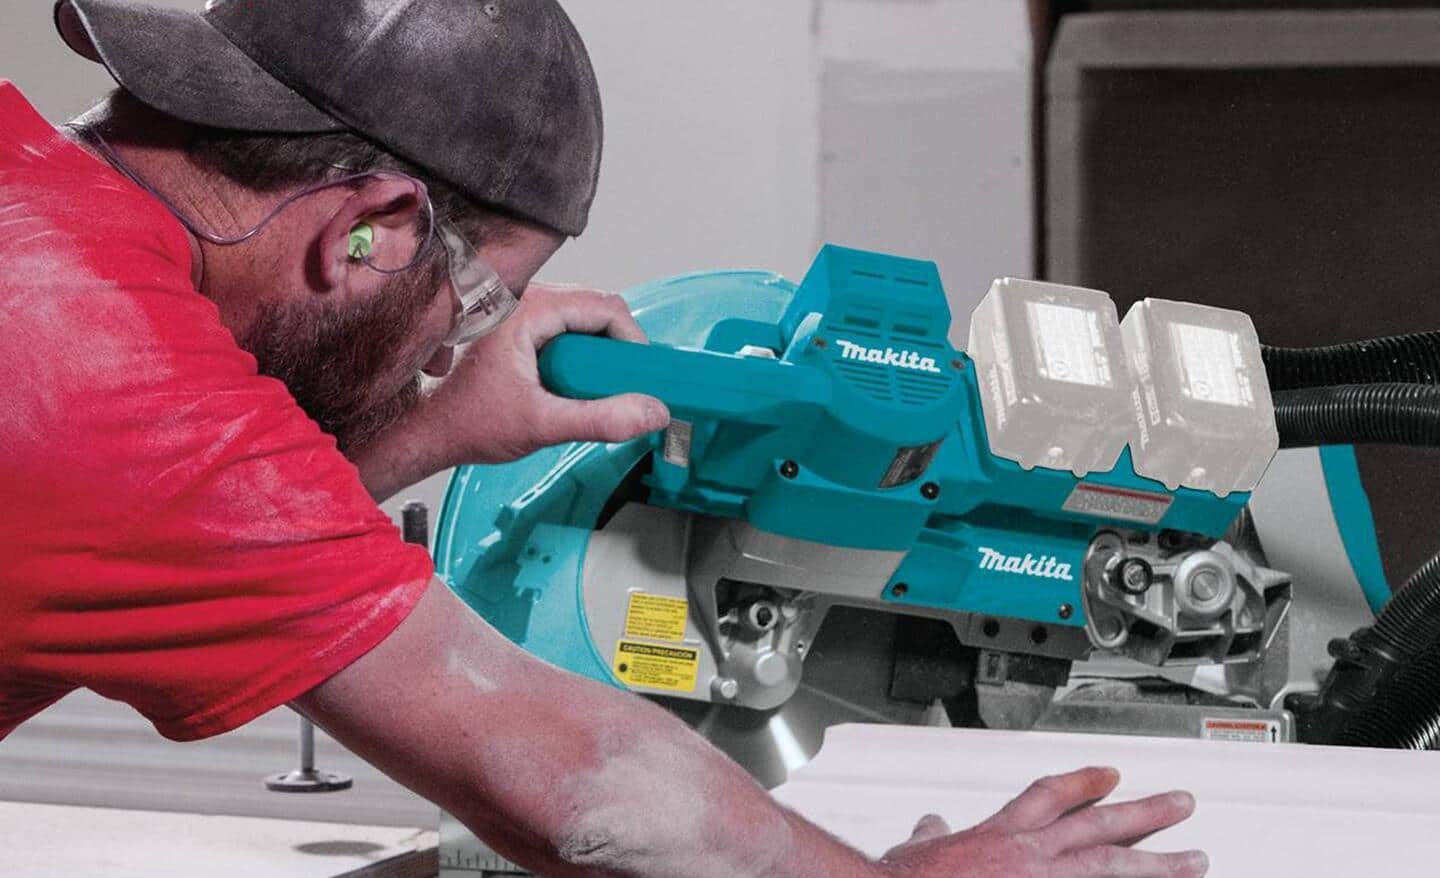 A person wears ear and eye protection while making a bevel cut using a power miter saw.